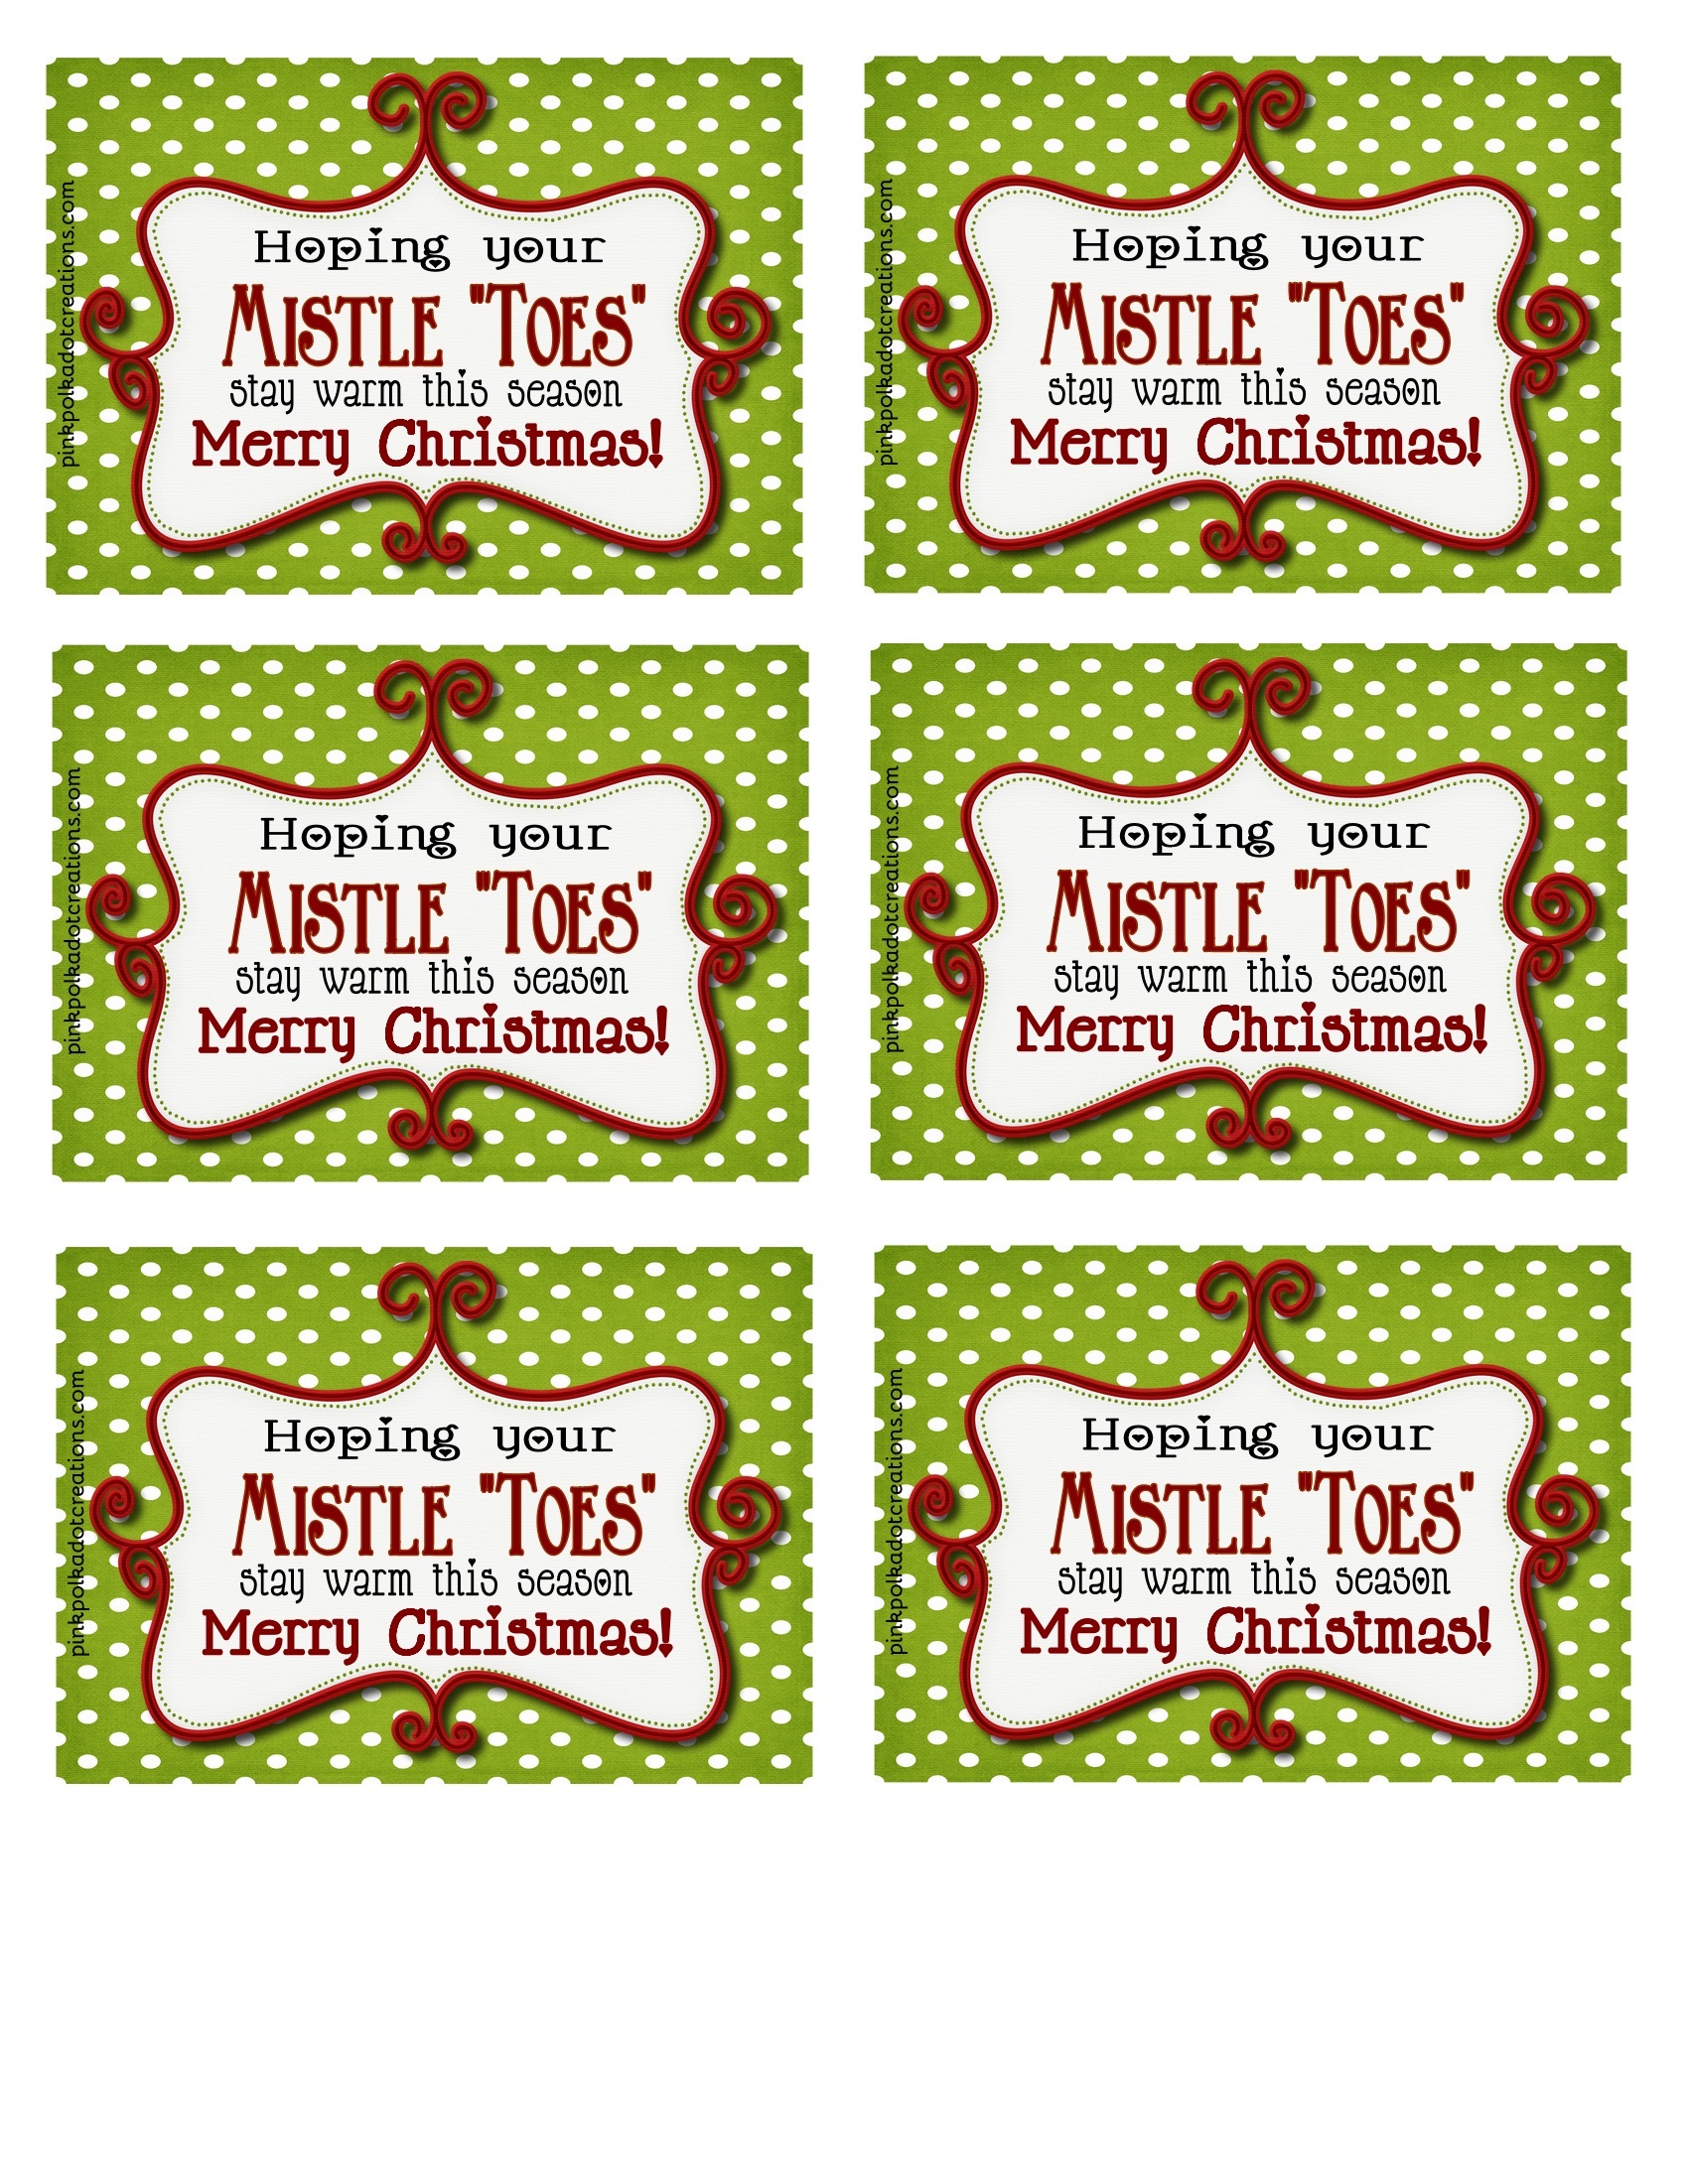 Mistle&amp;quot;toes&amp;quot; Gift Idea - Pink Polka Dot Creations - Free Printable Mistletoe Tags